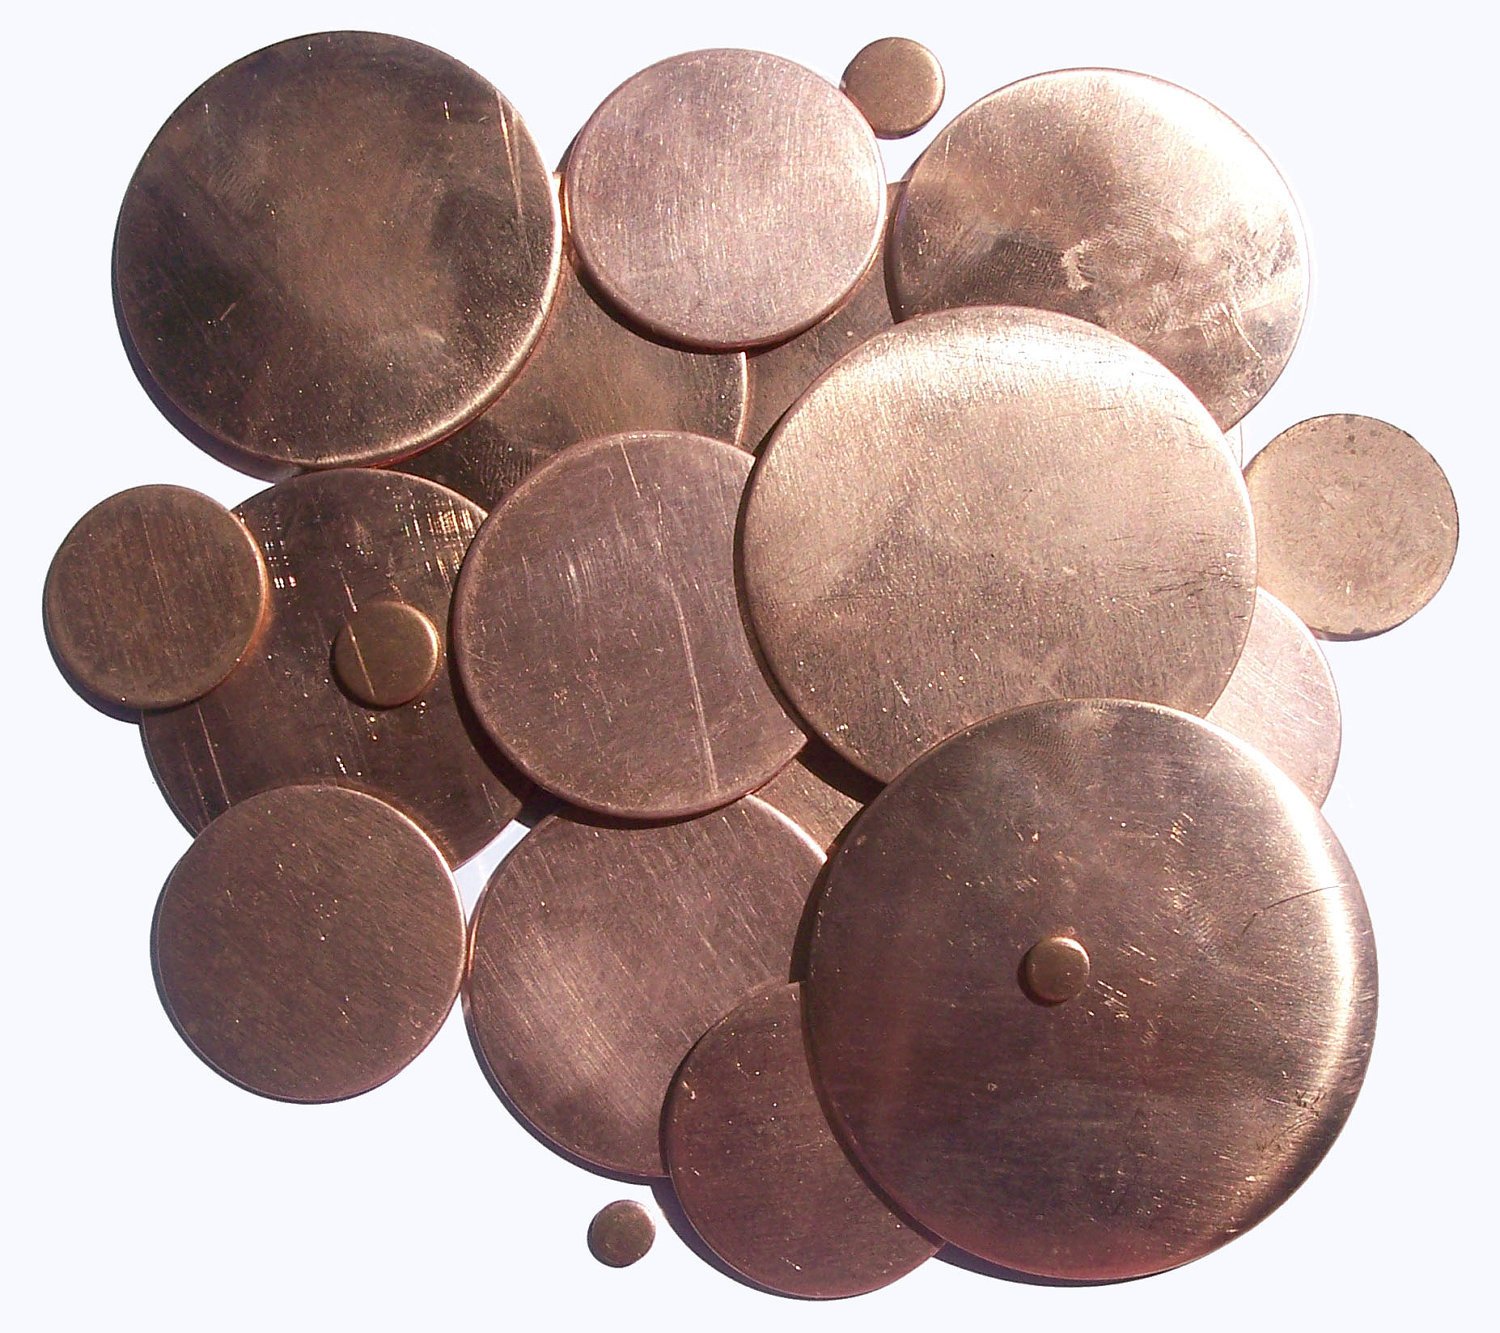 Pure Metal Blank 25mm Disc 24G Enameling Stamping Texturing Soldering Blanks - Jewelry Supplies - 6 Pieces